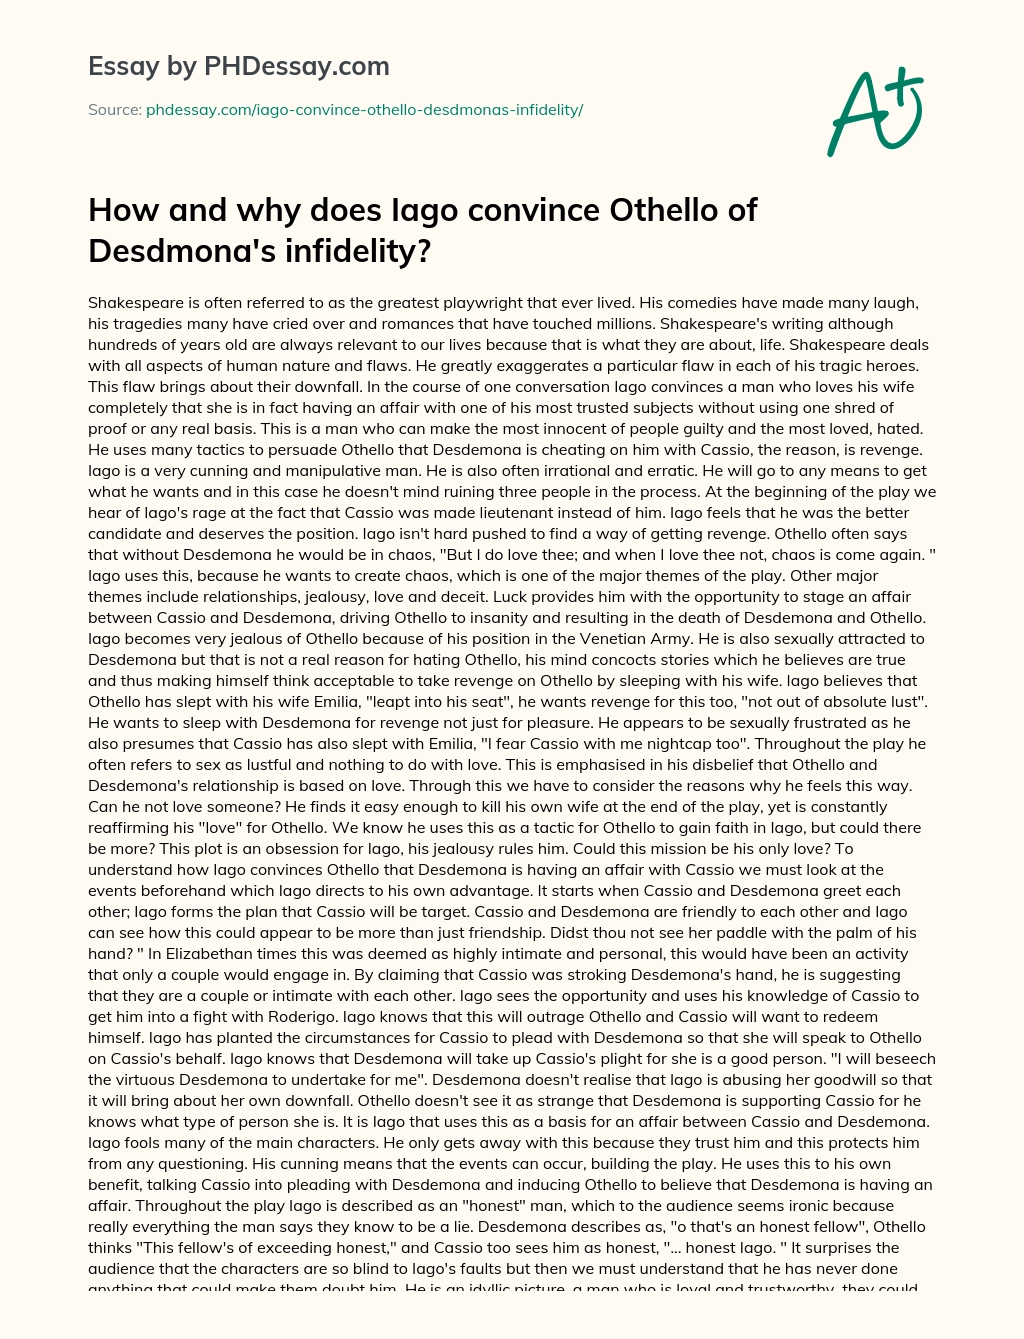 How and why does Iago convince Othello of Desdmona’s infidelity? essay